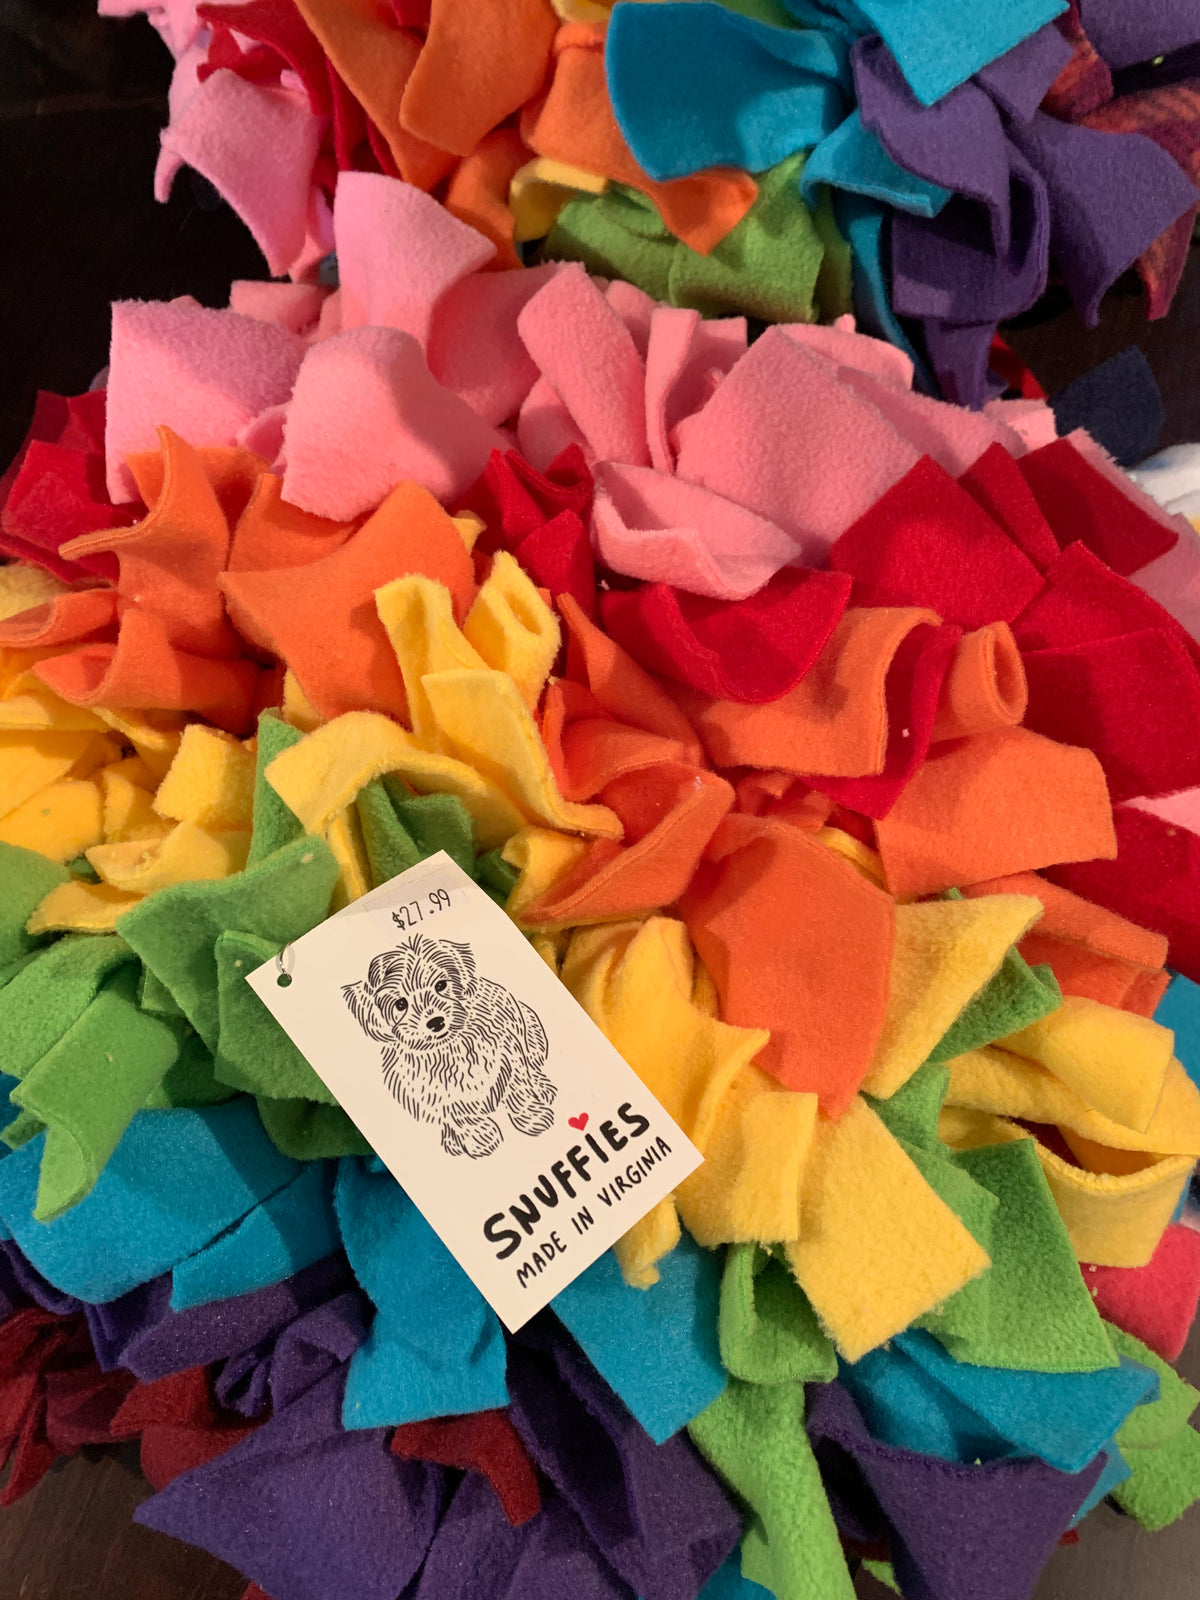 Snuffle mats are not only fun but also provide some health